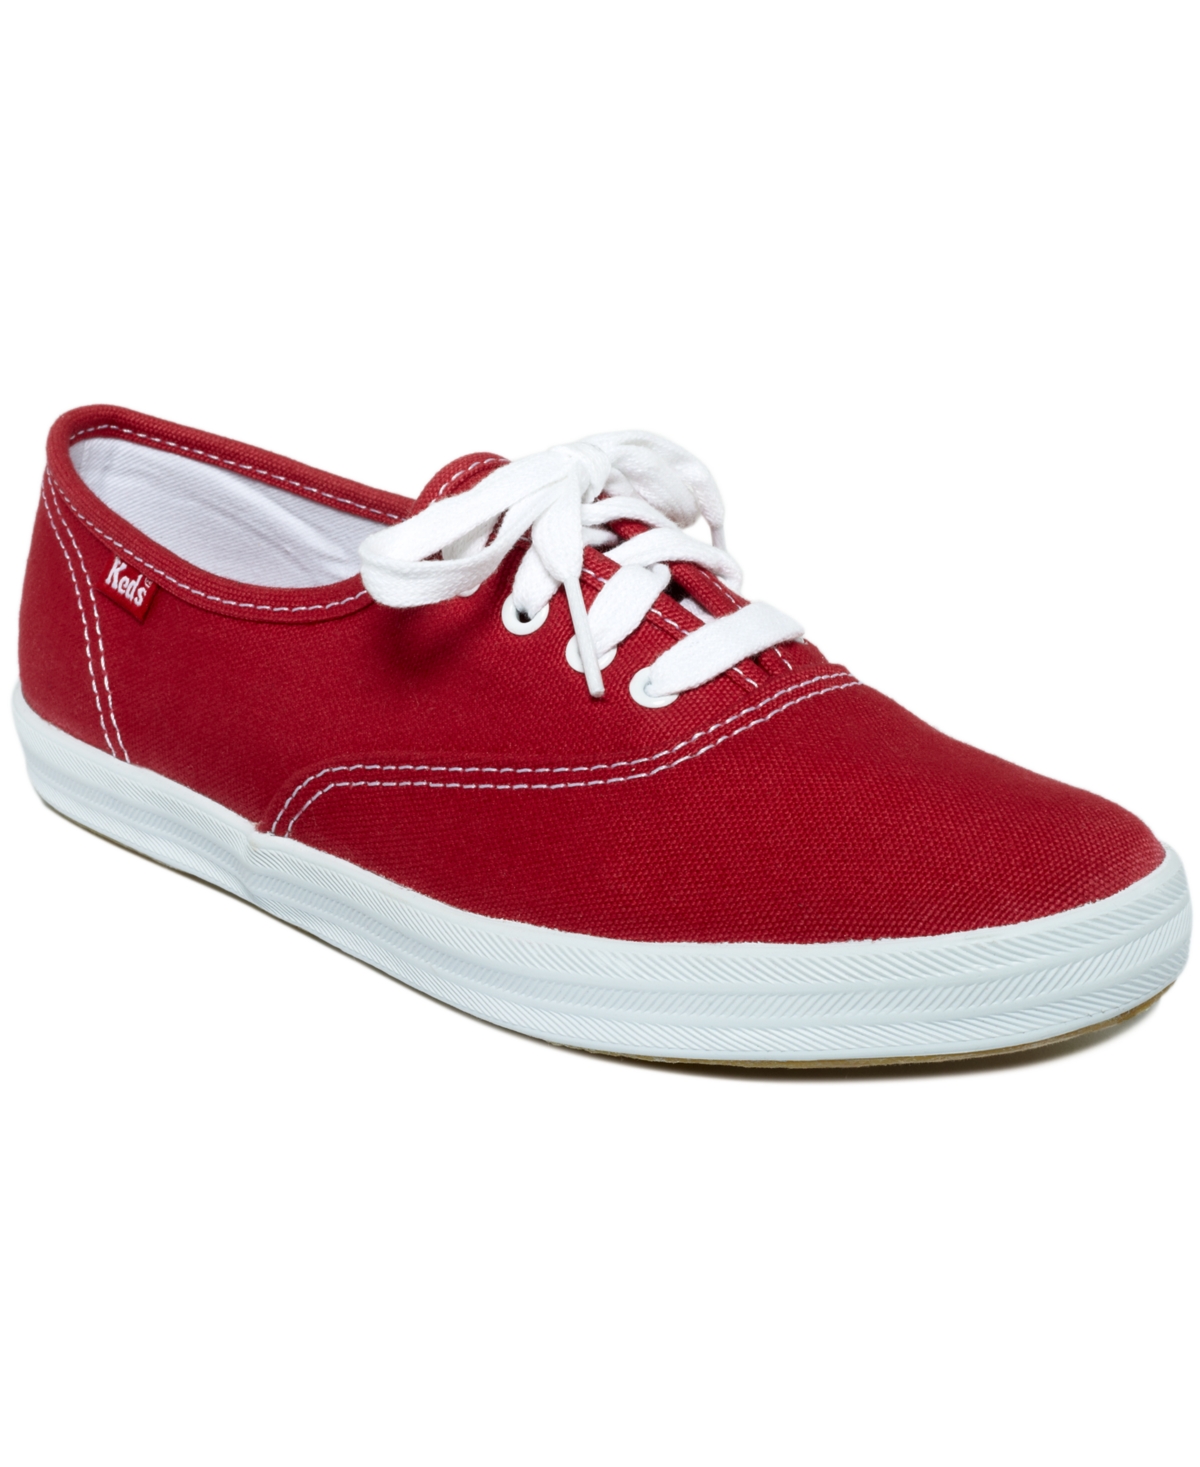 UPC 044209535819 product image for Keds Women's Champion Ortholite Lace-Up Oxford Fashion Sneakers from Finish Line | upcitemdb.com